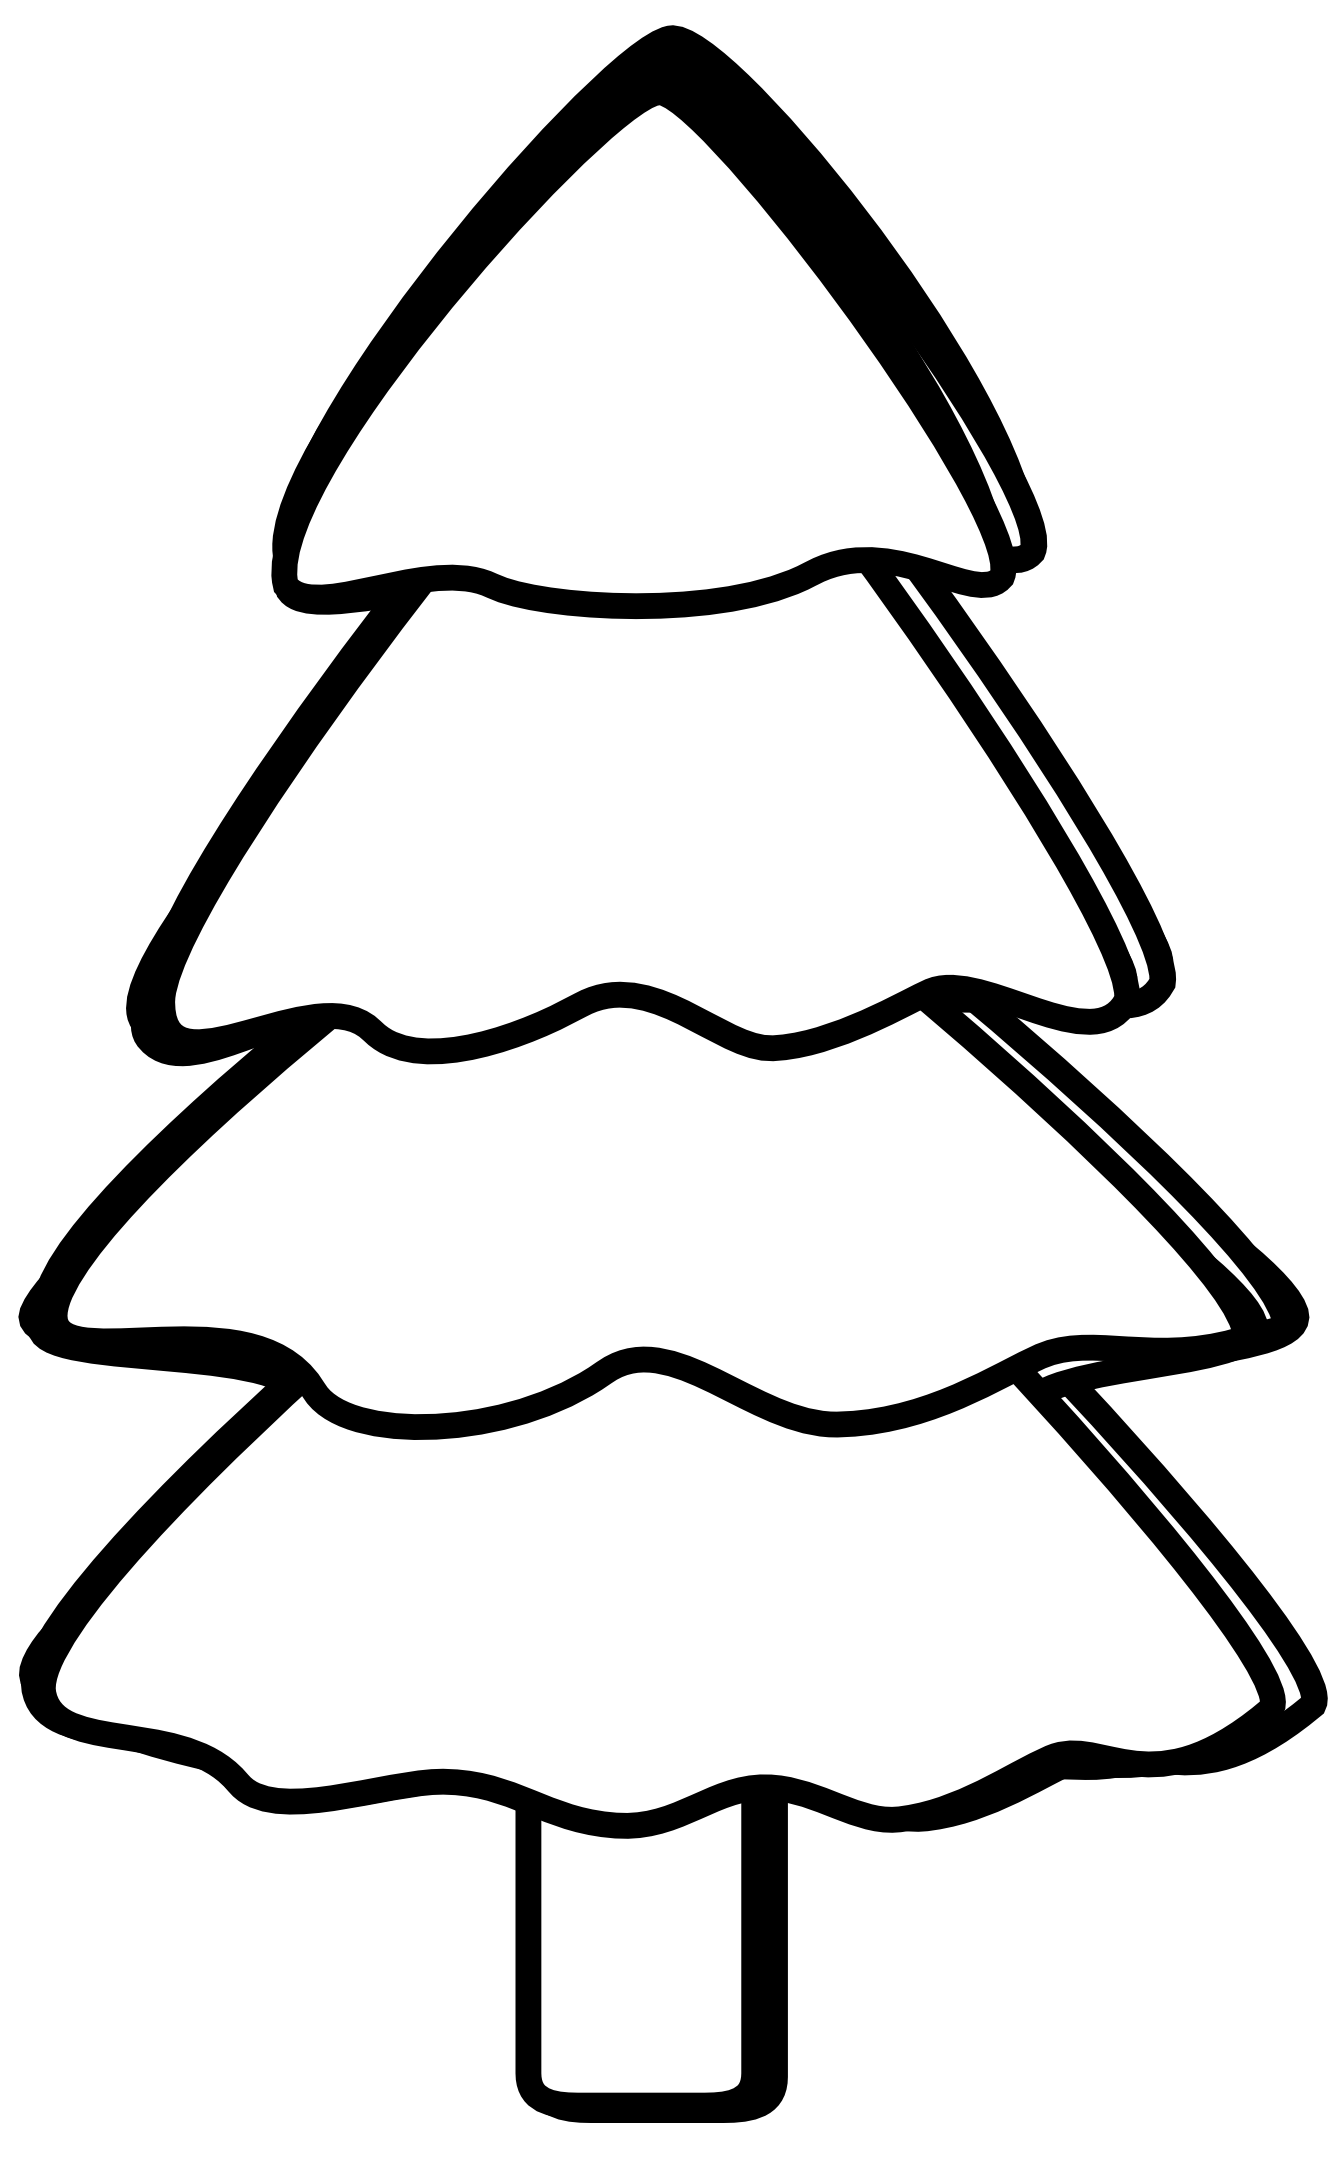 clip art line drawing of a tree - photo #37